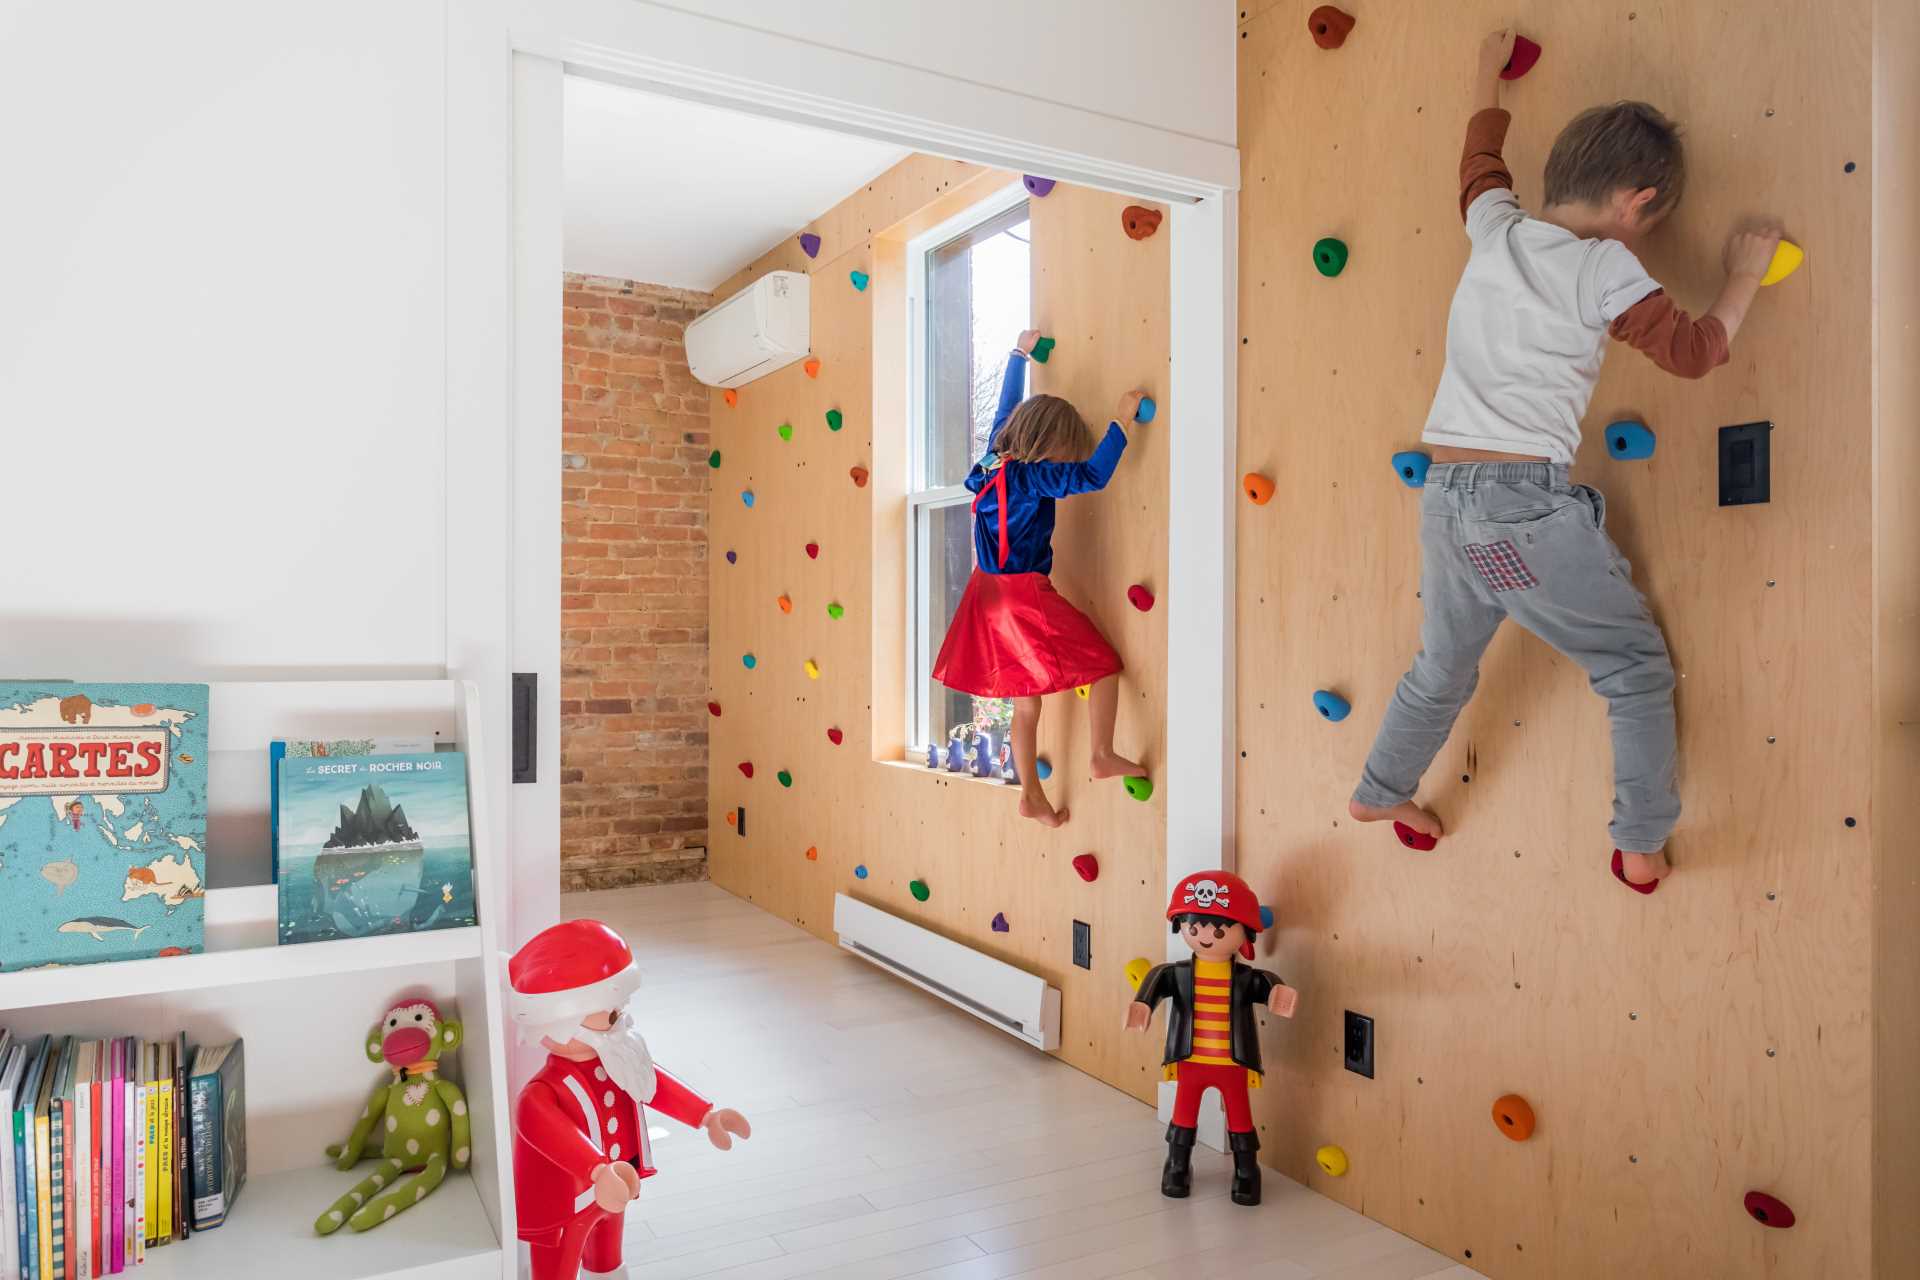 A rock-climbing wall decorates the children’s bedroom and adds a colorful accent.